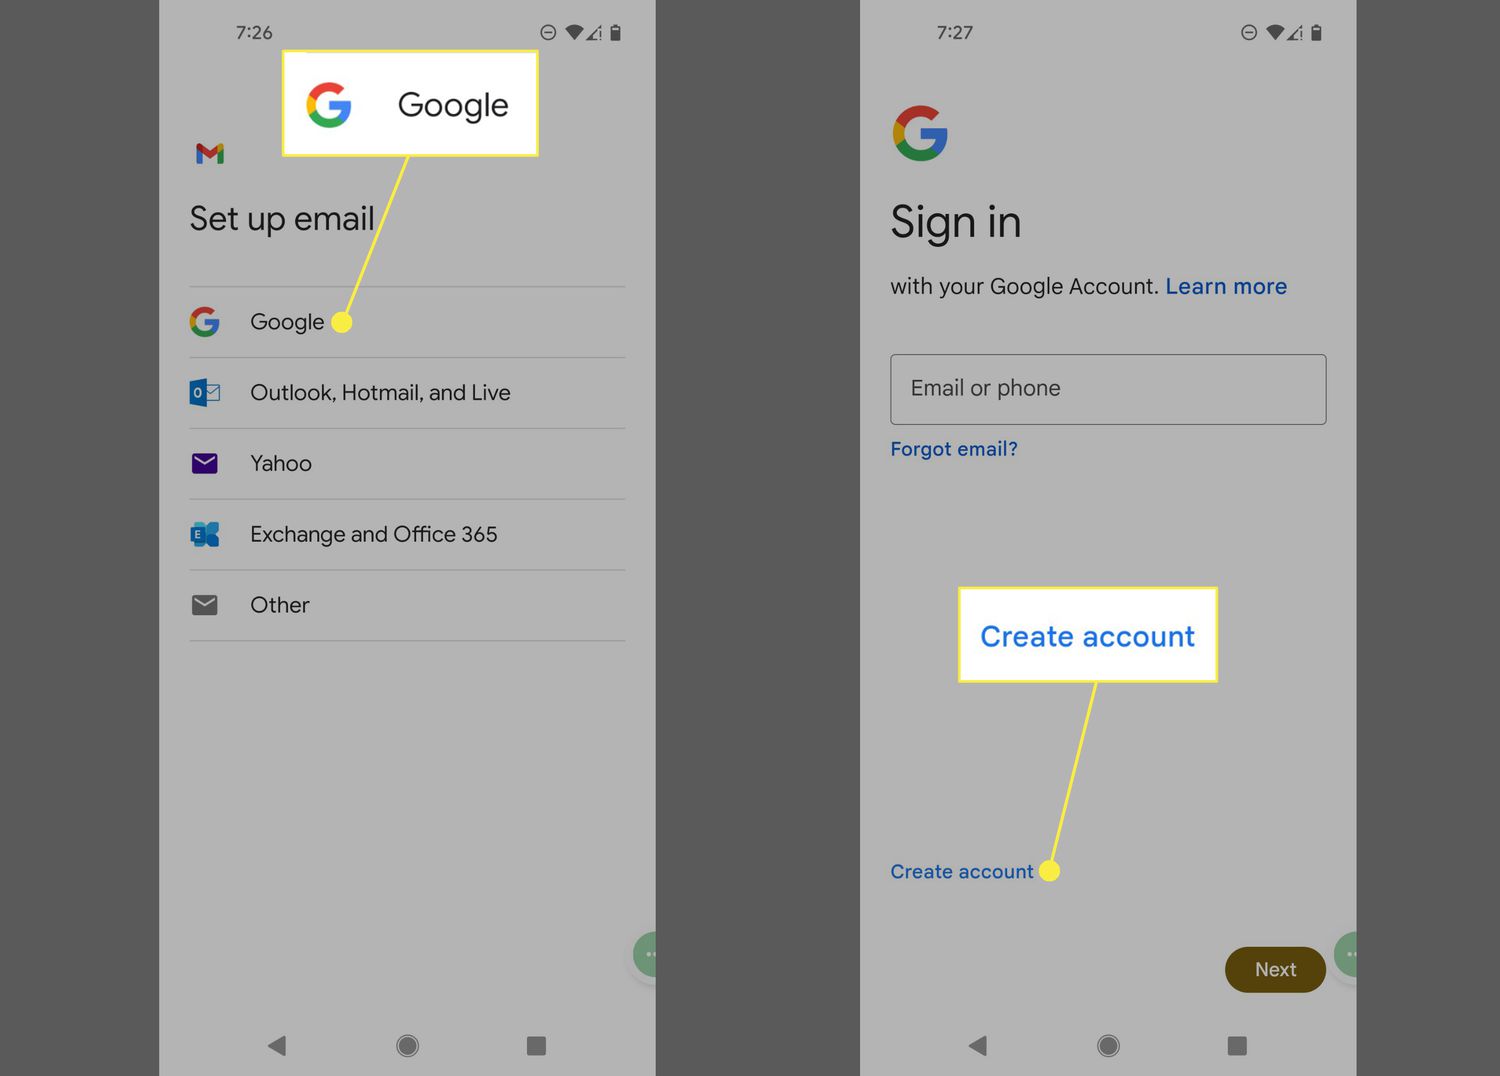 Google and Create account in Android Gmail app